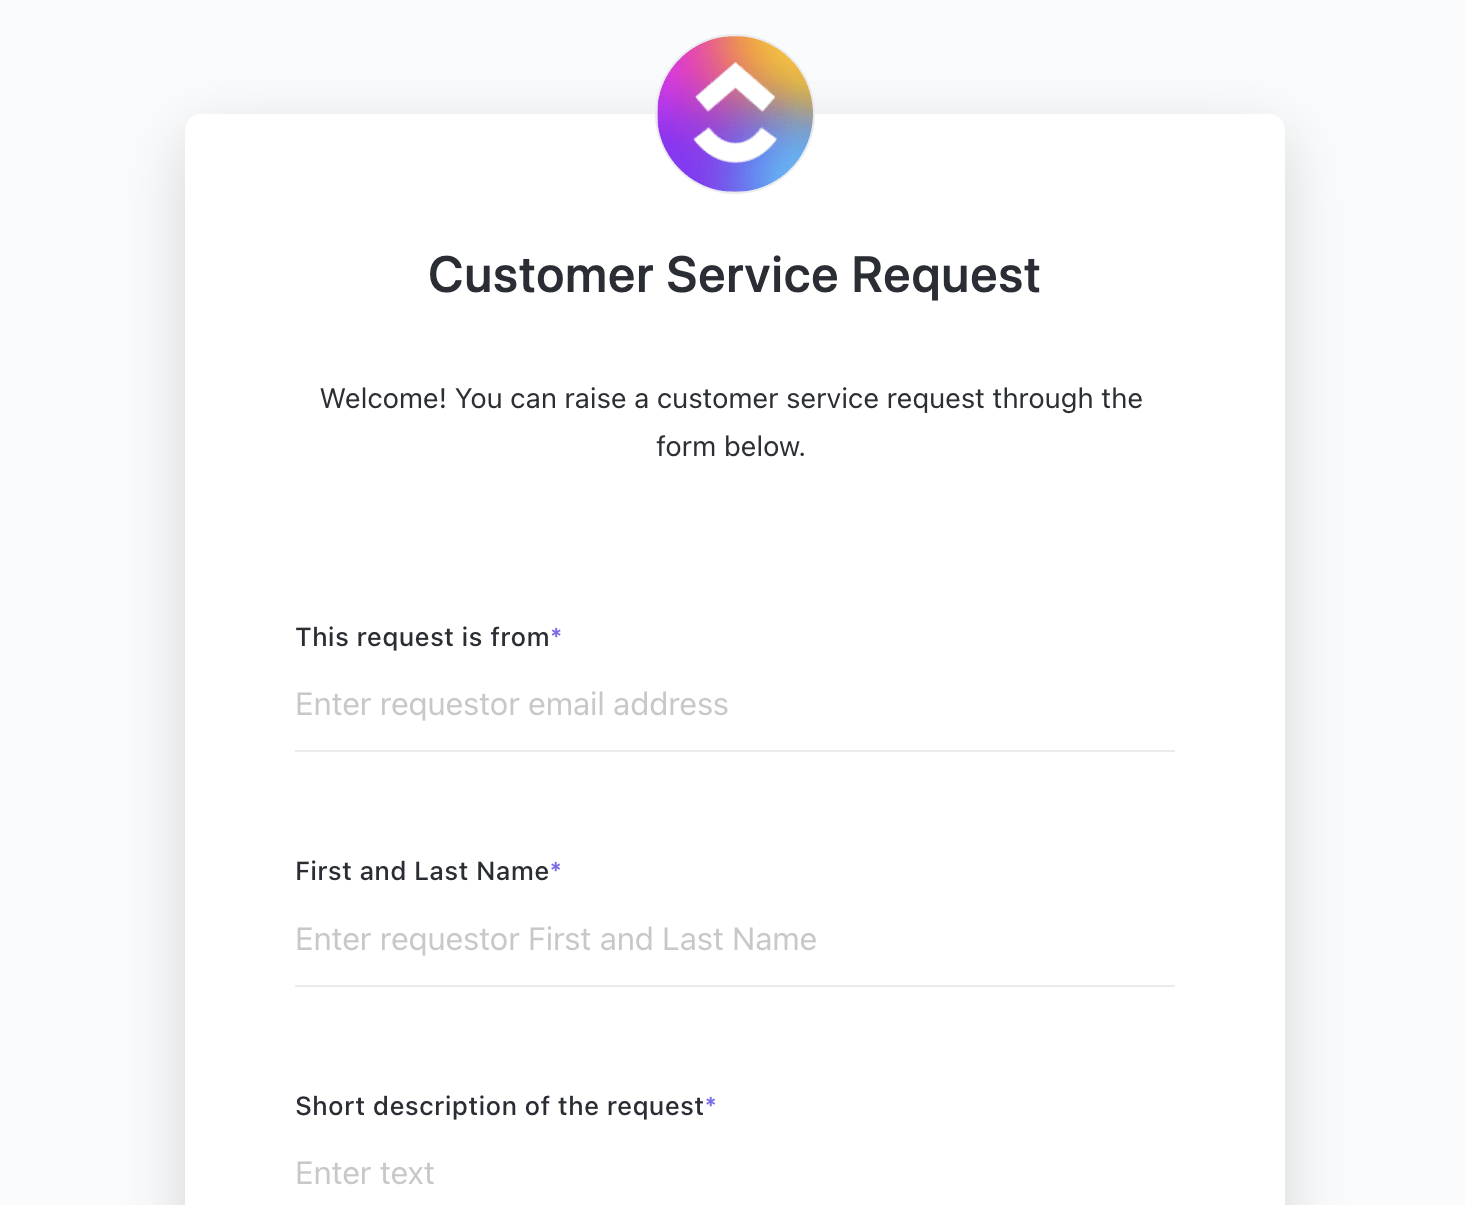 Track incoming support tickets, offer on-time resolutions, and collect feedback using the Customer Service Management Template by ClickUp